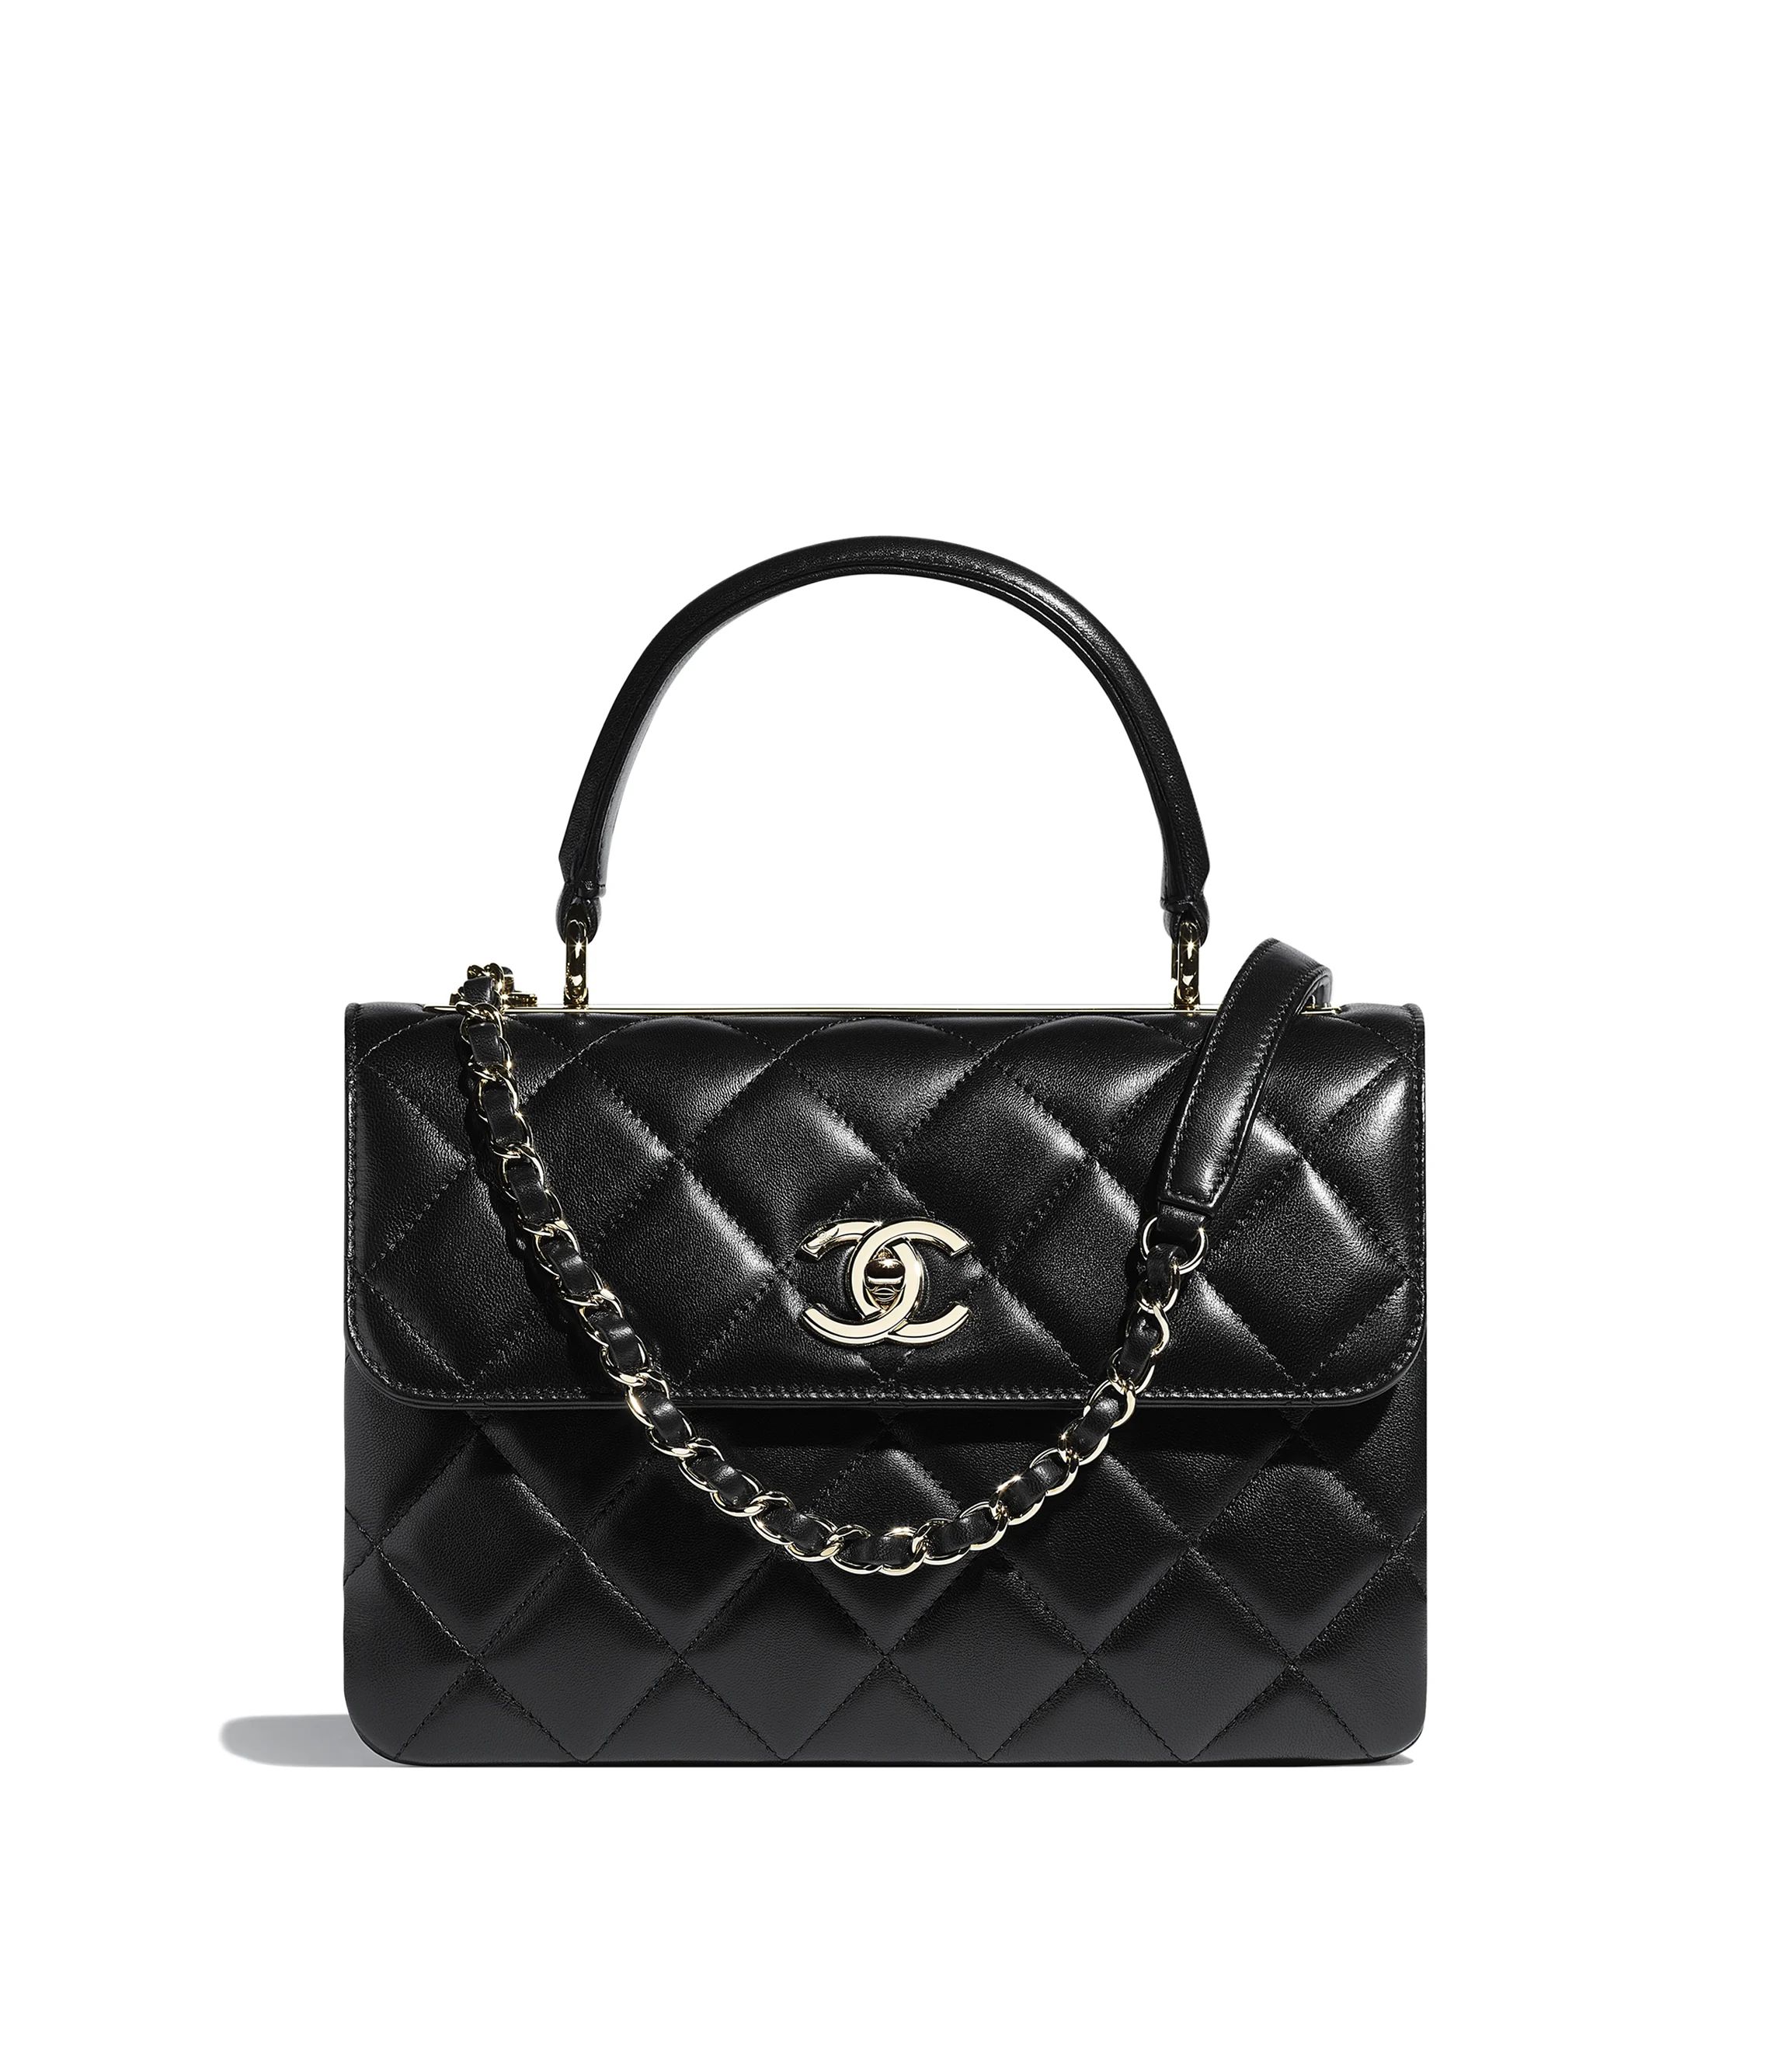 Flap bag with top handle, Lambskin & gold-tone metal, black — Fashion | CHANEL | Chanel, Inc. (US)